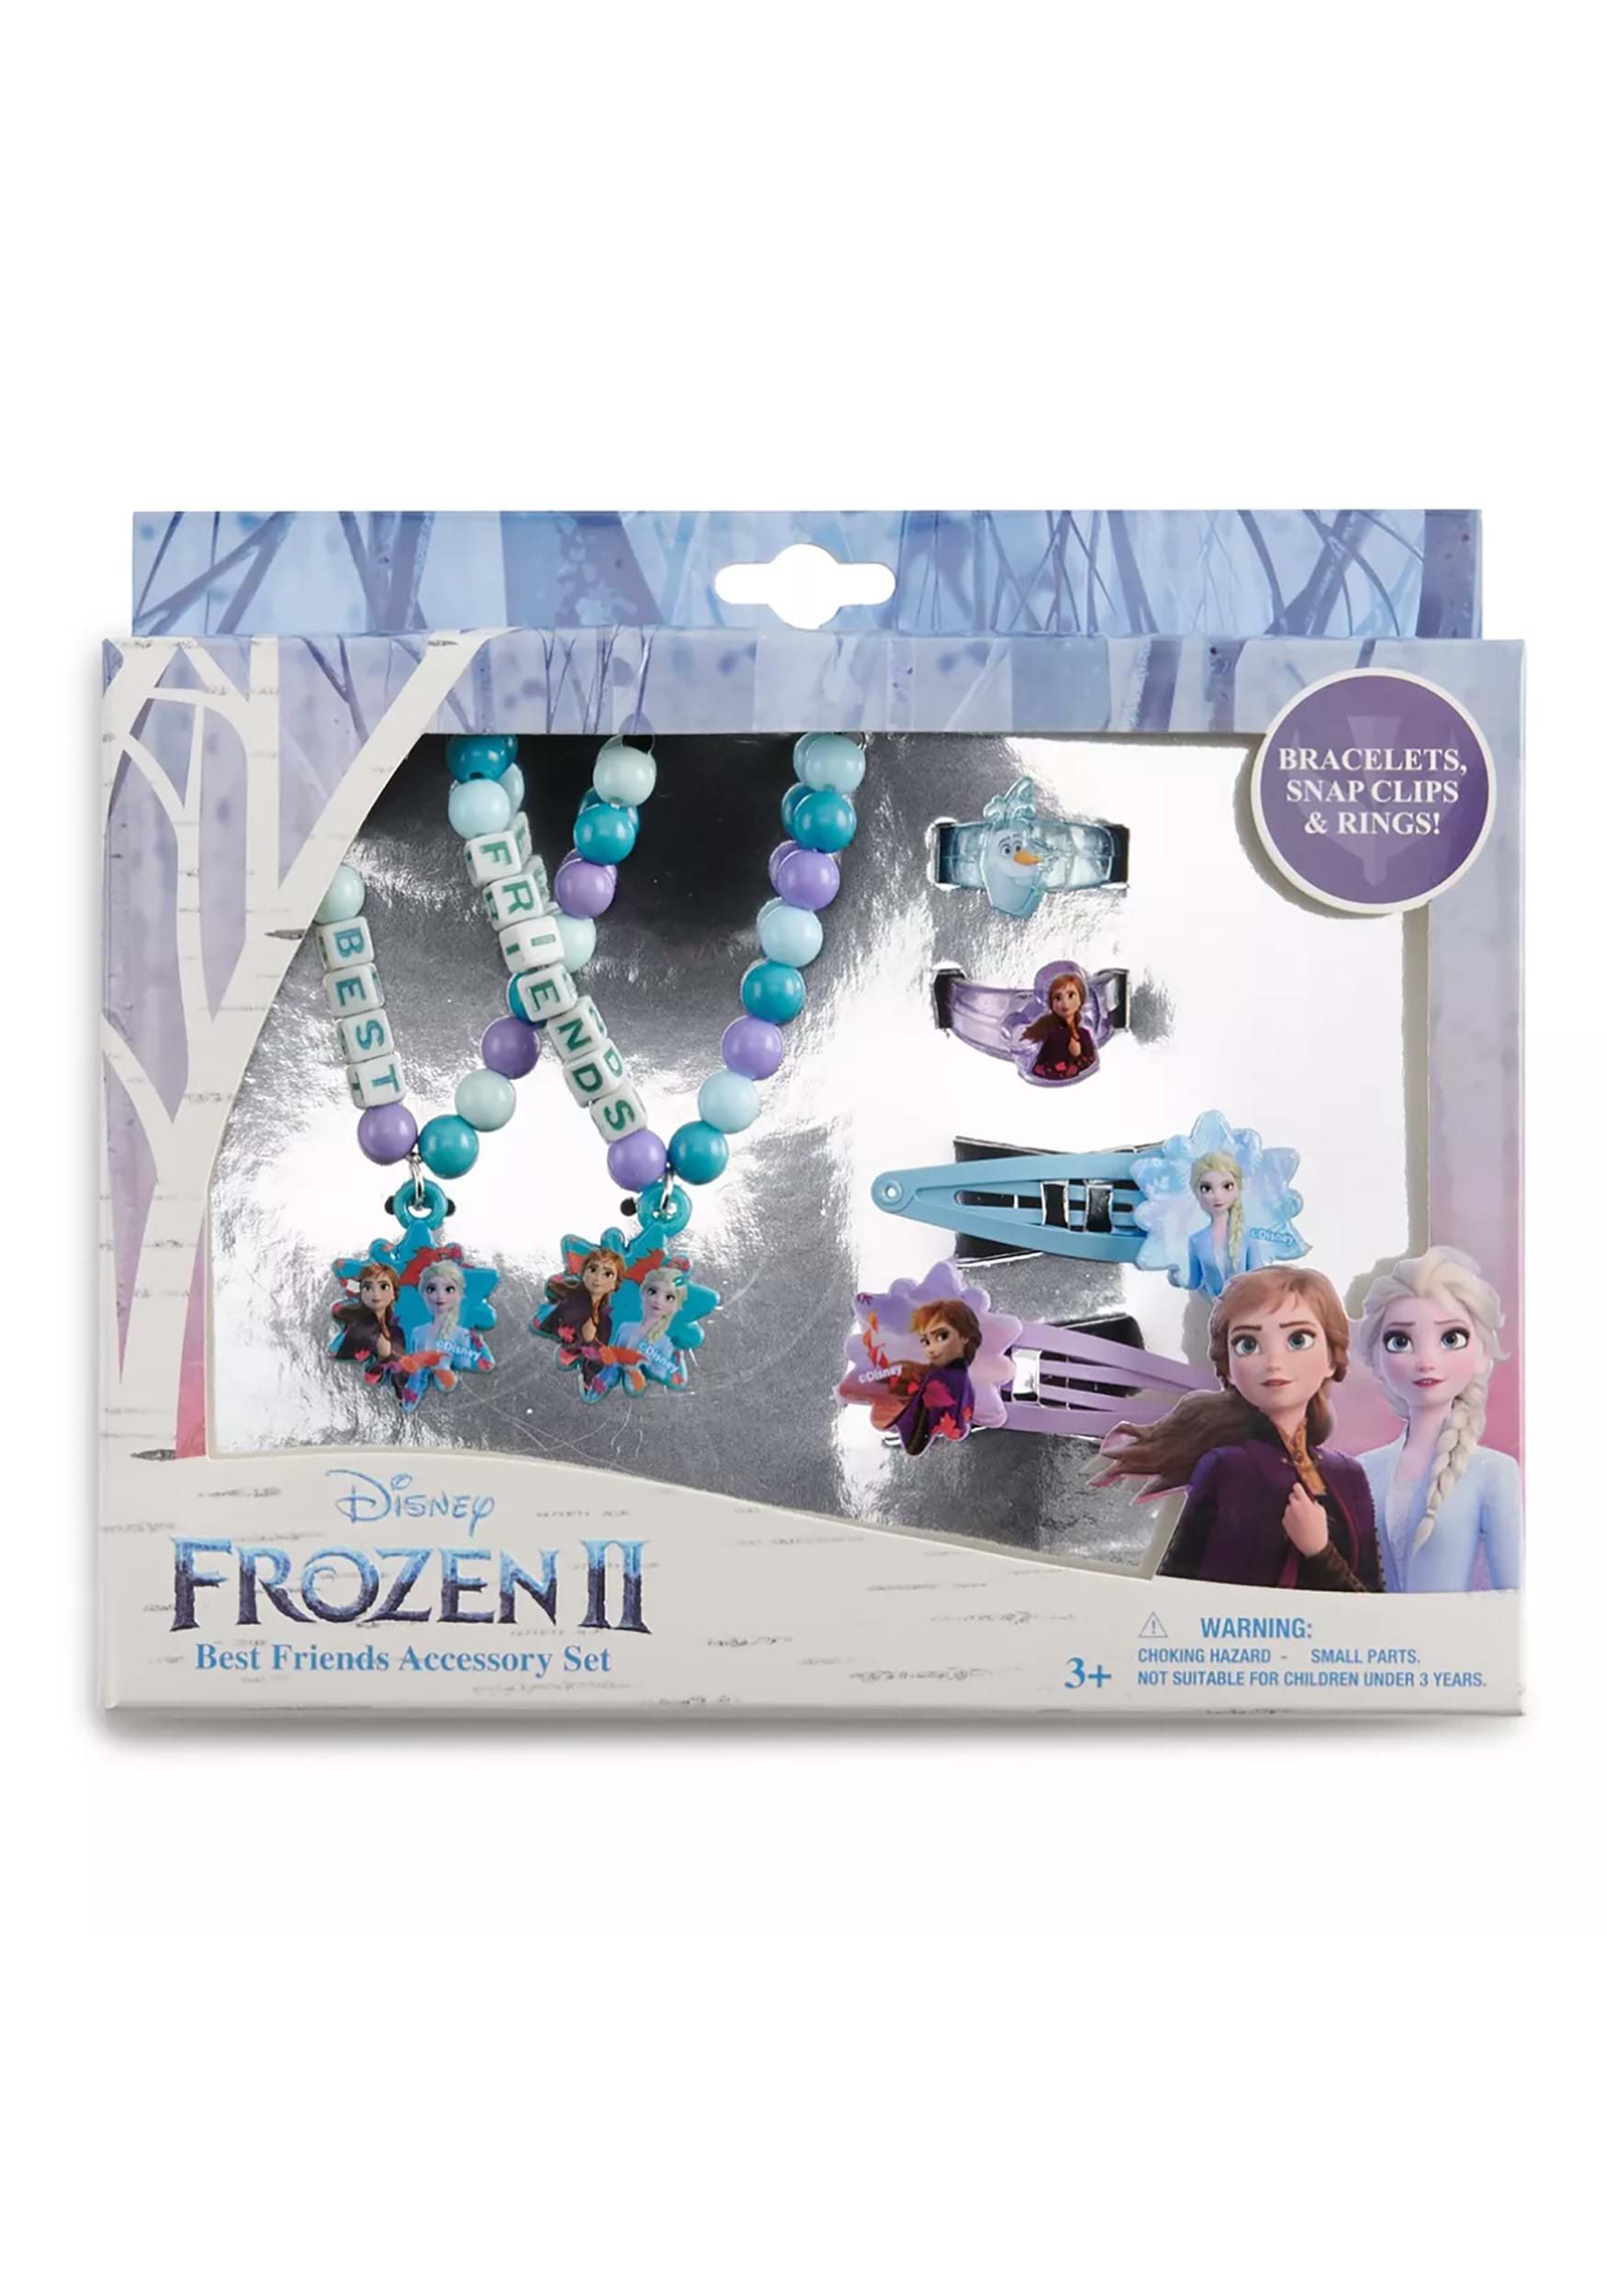 Disneys Frozen 2 gifts for every Anna and Elsa fan